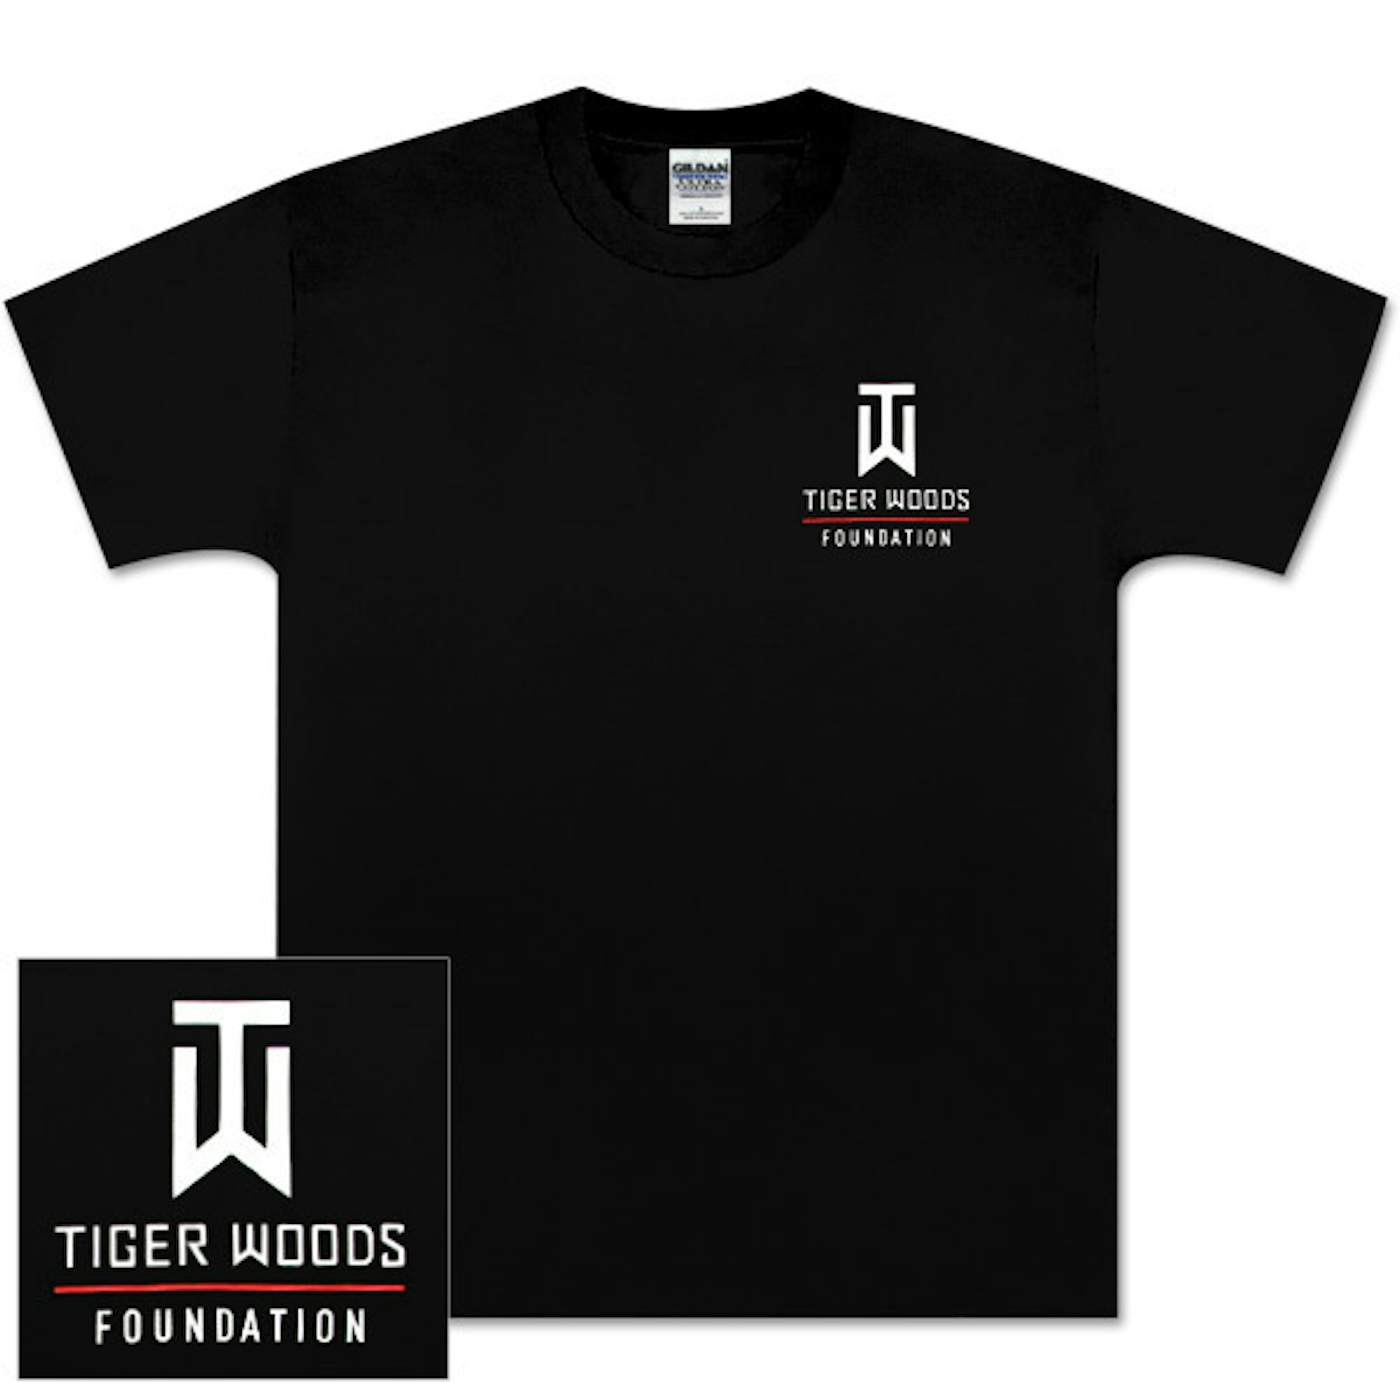 Tiger Woods Foundation t-shirts